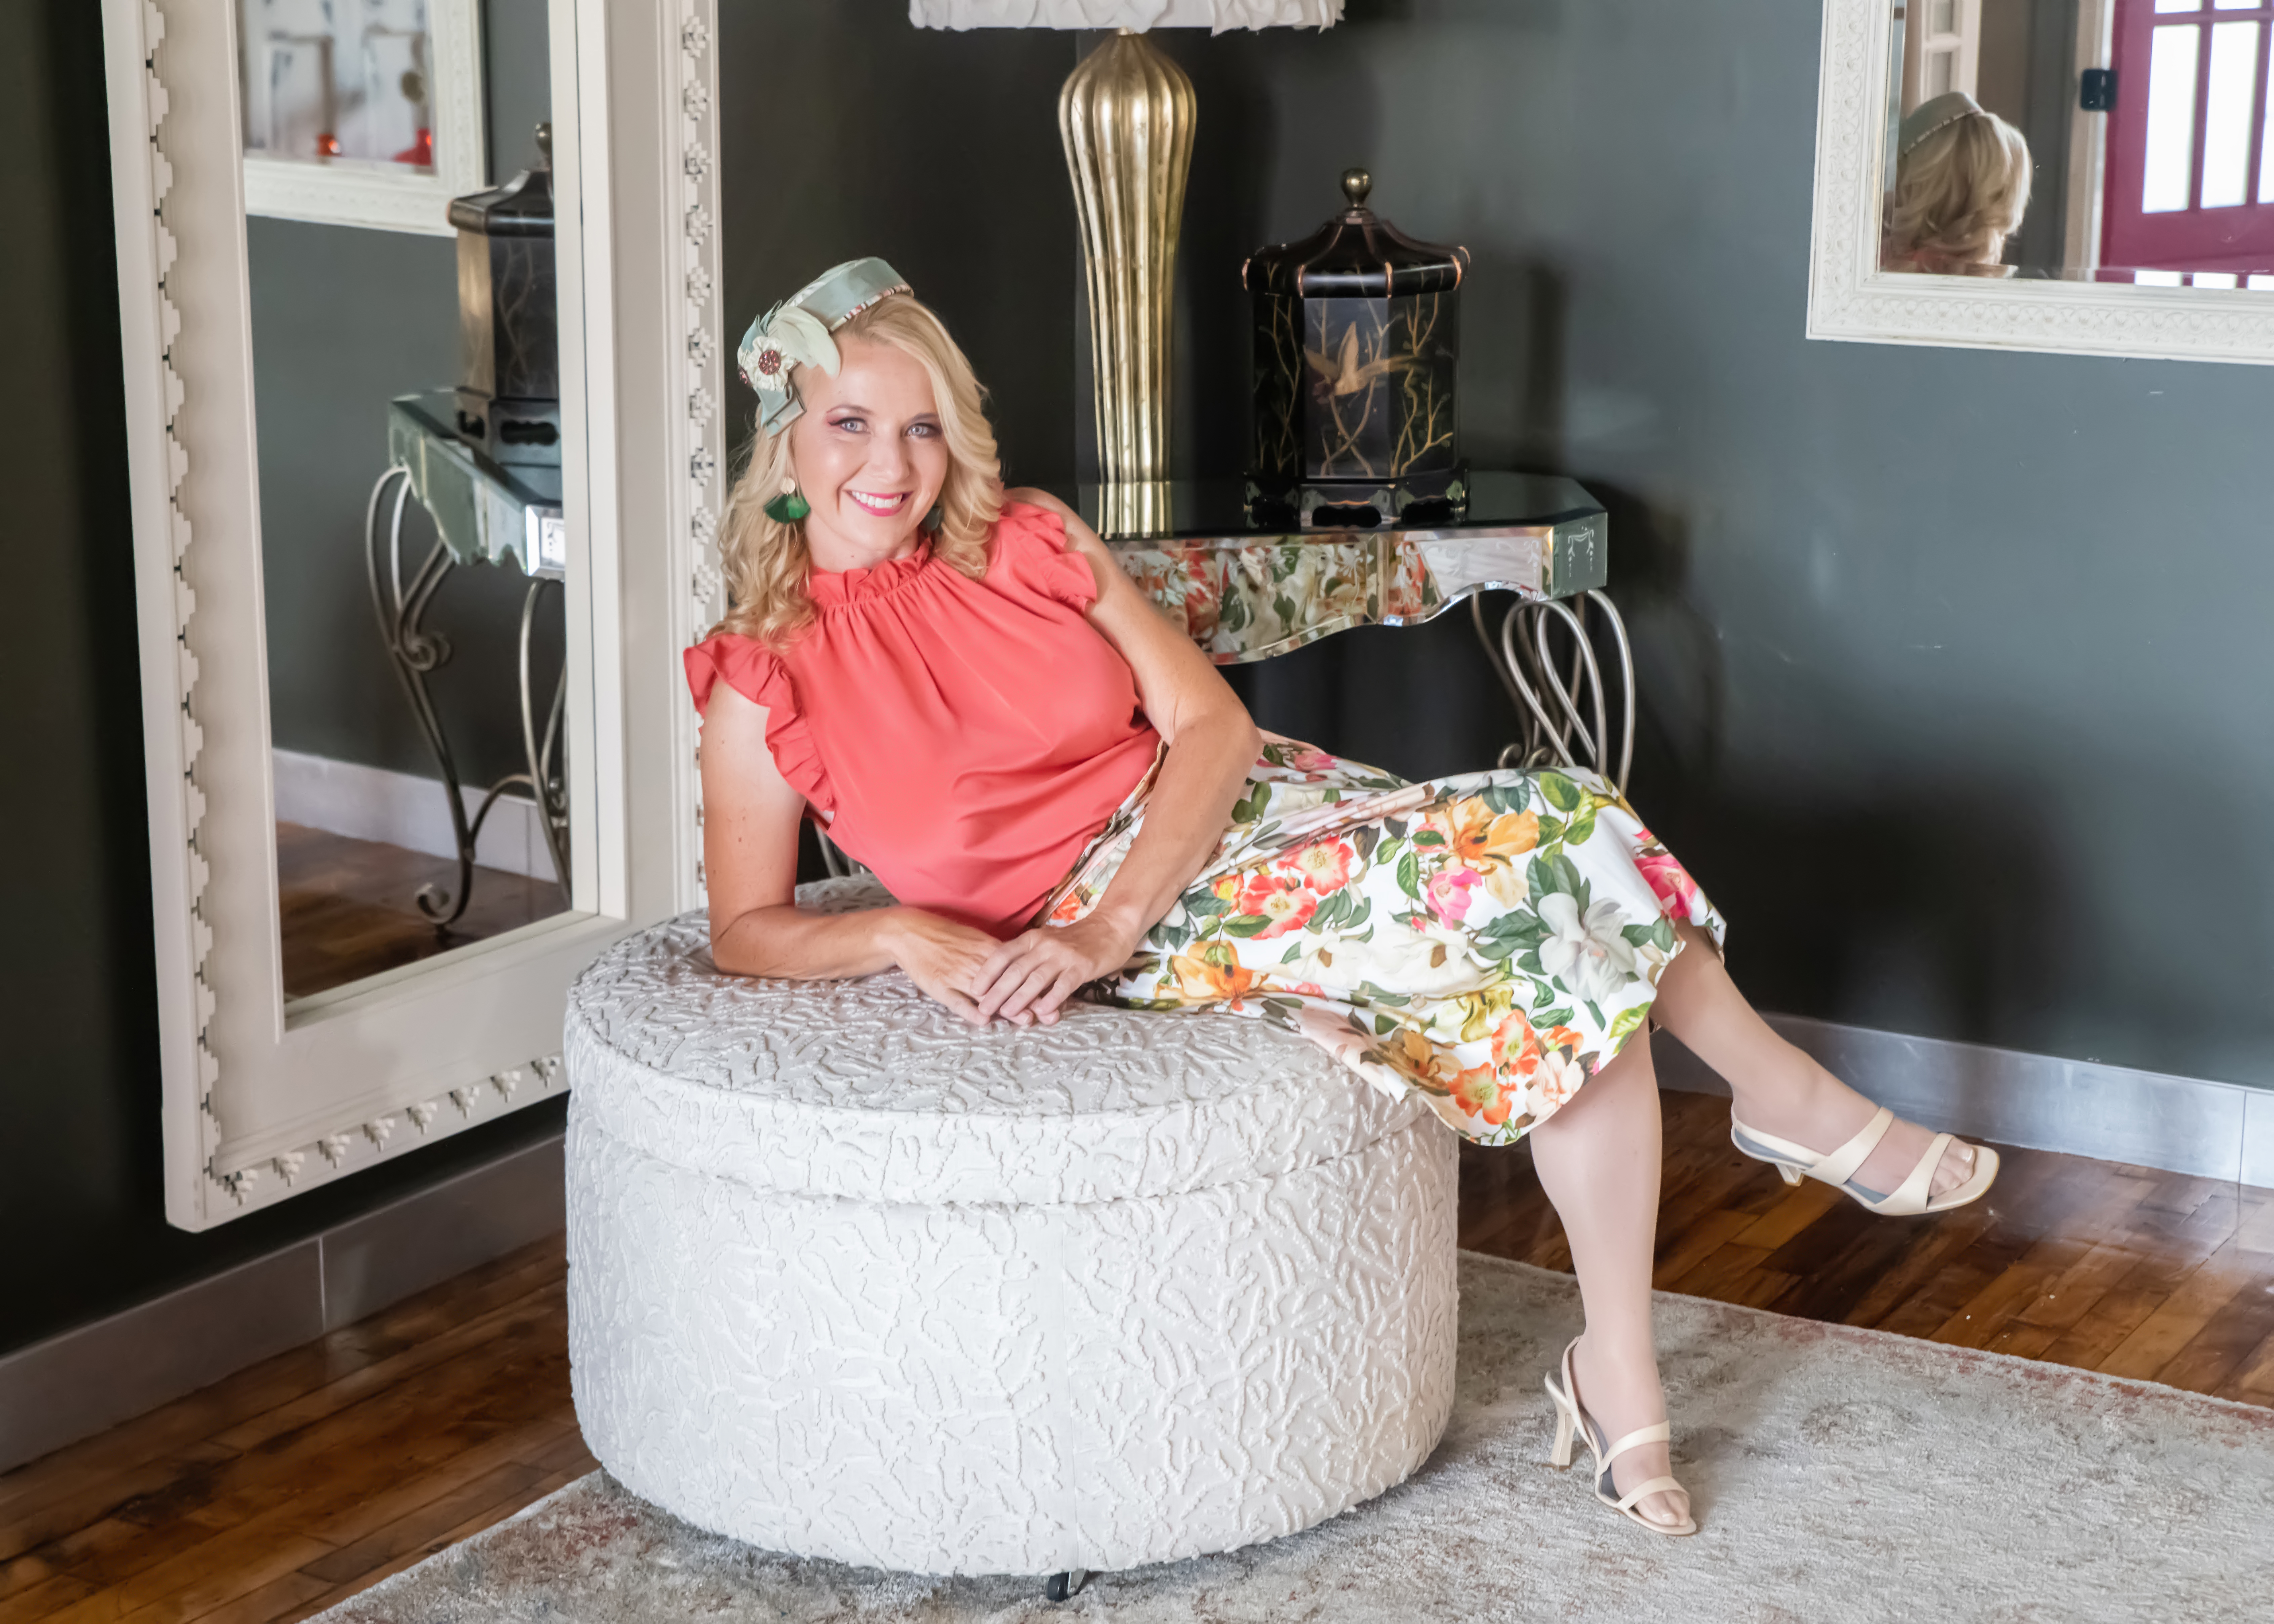 Palm Paradise Model Michele Langbein is all set for an afternoon out in this fun & colorful outfit reminiscent of a bygone era